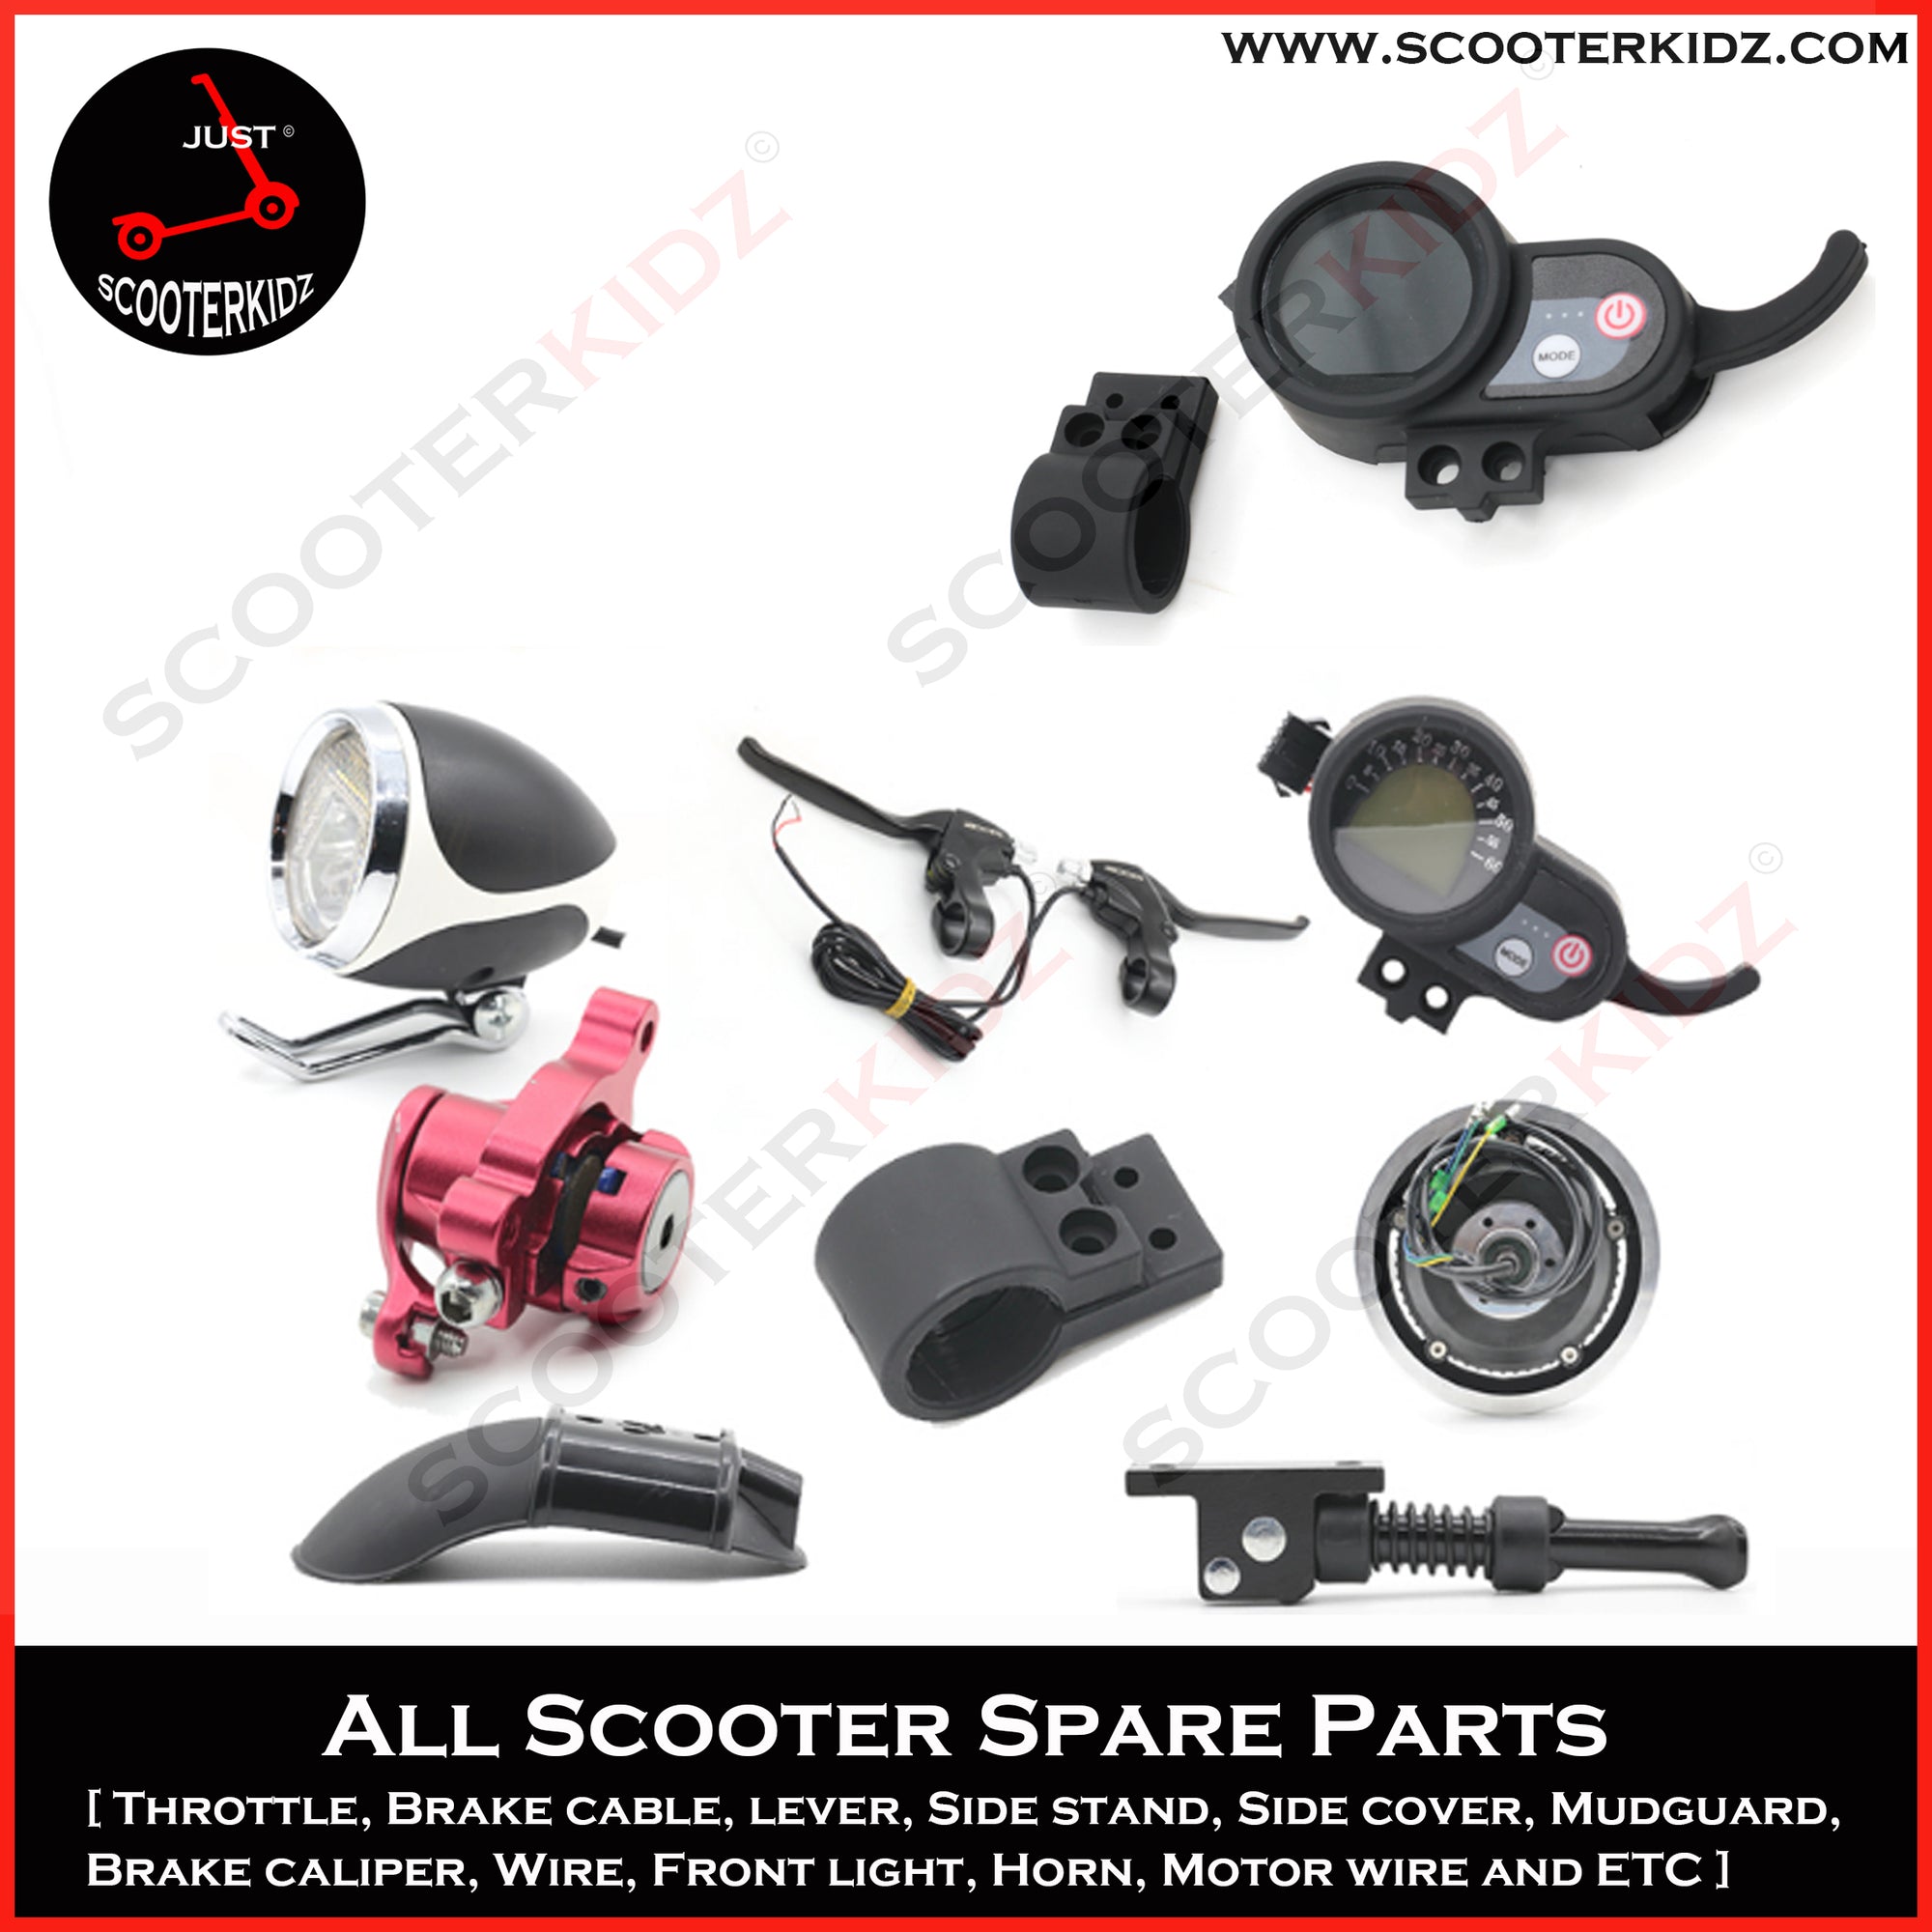 SPARE PART for Electric Scooter [ Throttle, Side stand, 6 wire. side guard, mudguard, charging port, cover rear light and etc ]